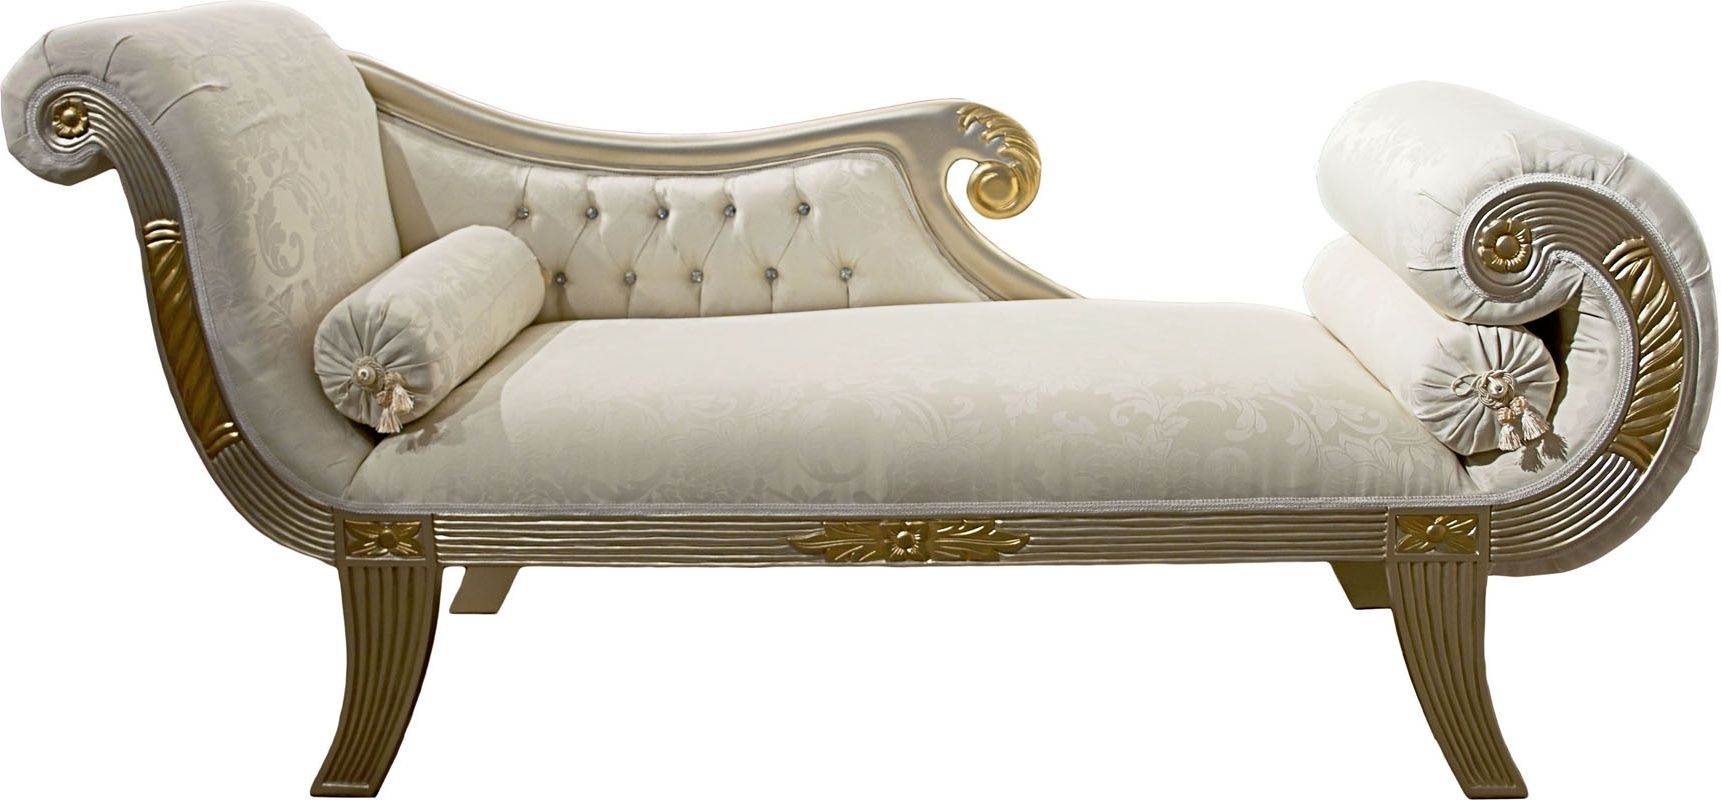 Best And Newest White Leather Vintage Chaise Lounge Chair In Victorian Style Plus Pertaining To Vintage Chaise Lounge Chairs (View 3 of 15)